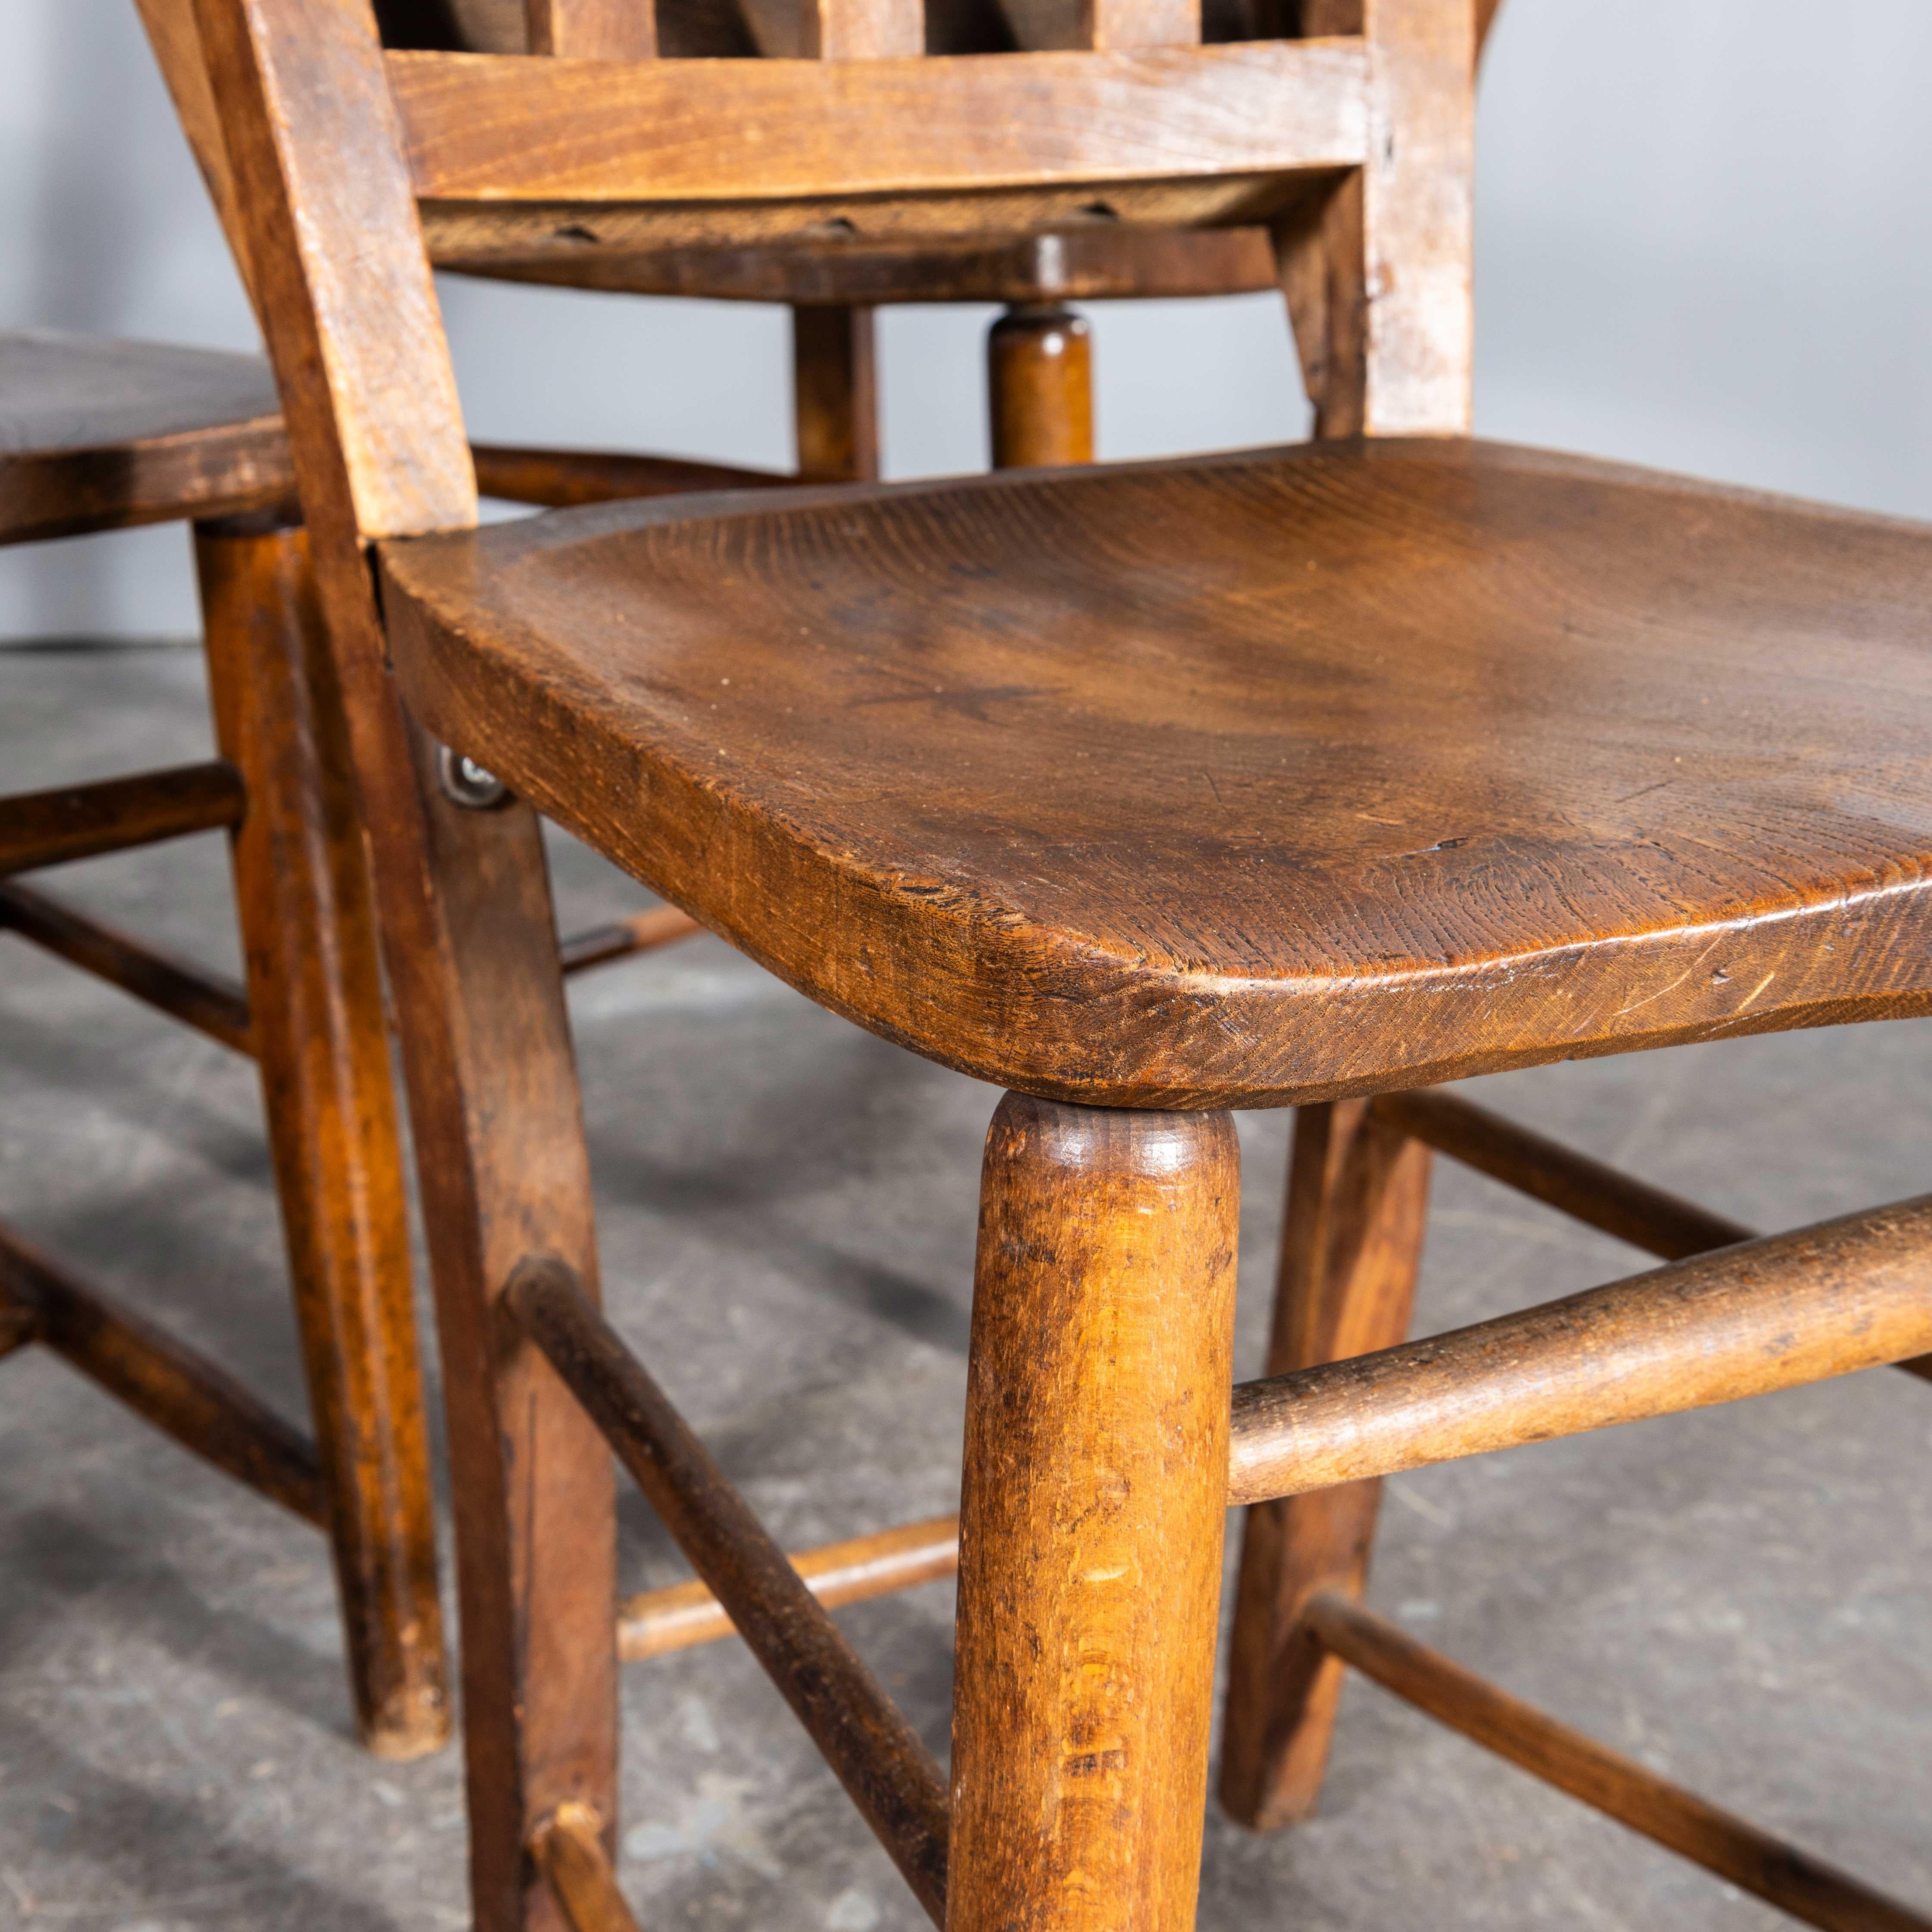 1940’s Solid Ash Church – Chapel Dining Chairs – Good Quantity Available
1940’s Solid Ash Church – Chapel Dining Chairs – Good Quantity Available. England has a wonderfully rich heritage for making chairs. At the height of production at the turn of